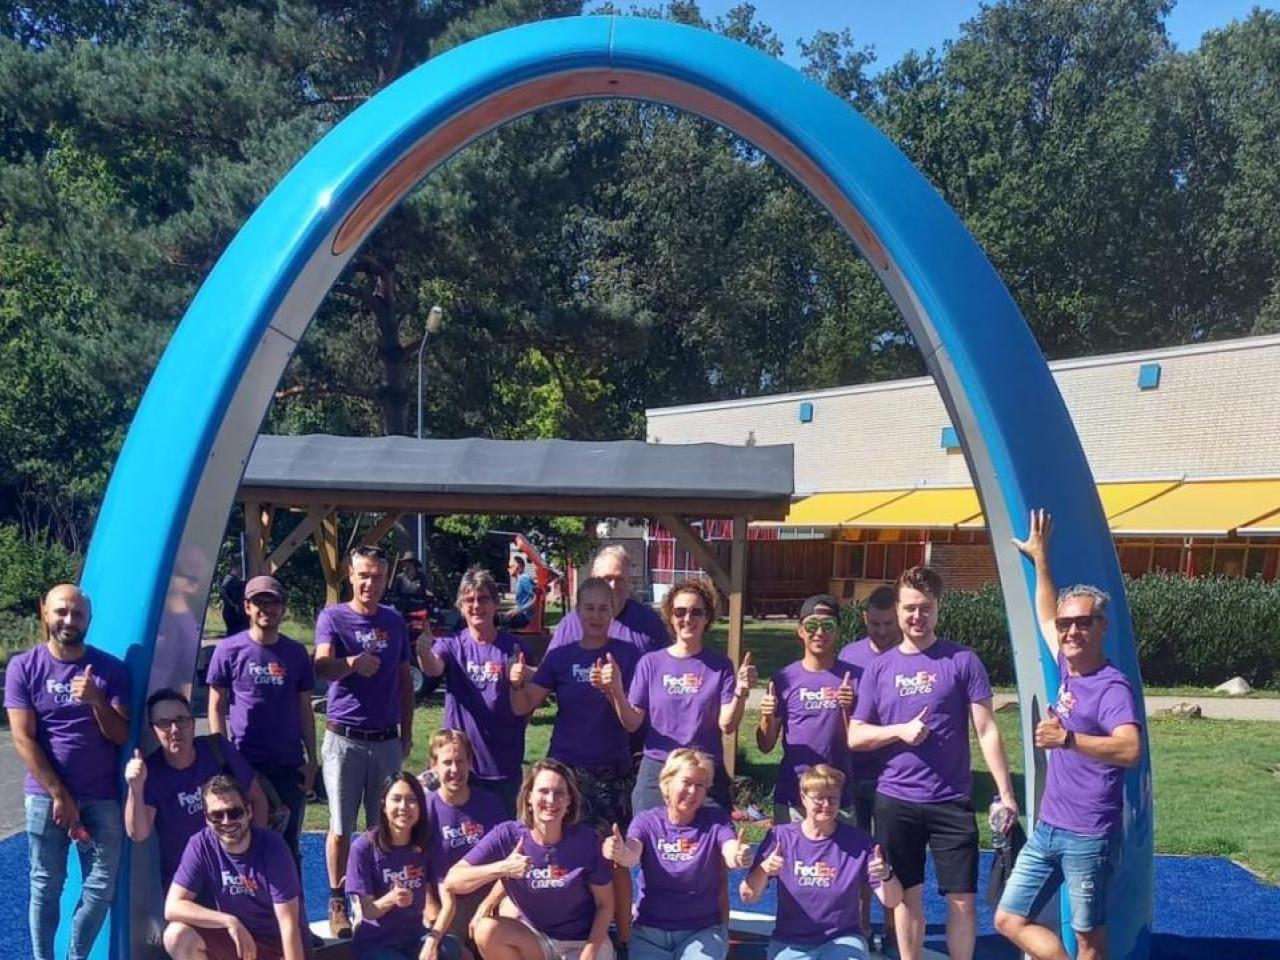 Volunteers posed in front of a large blue arch outside.